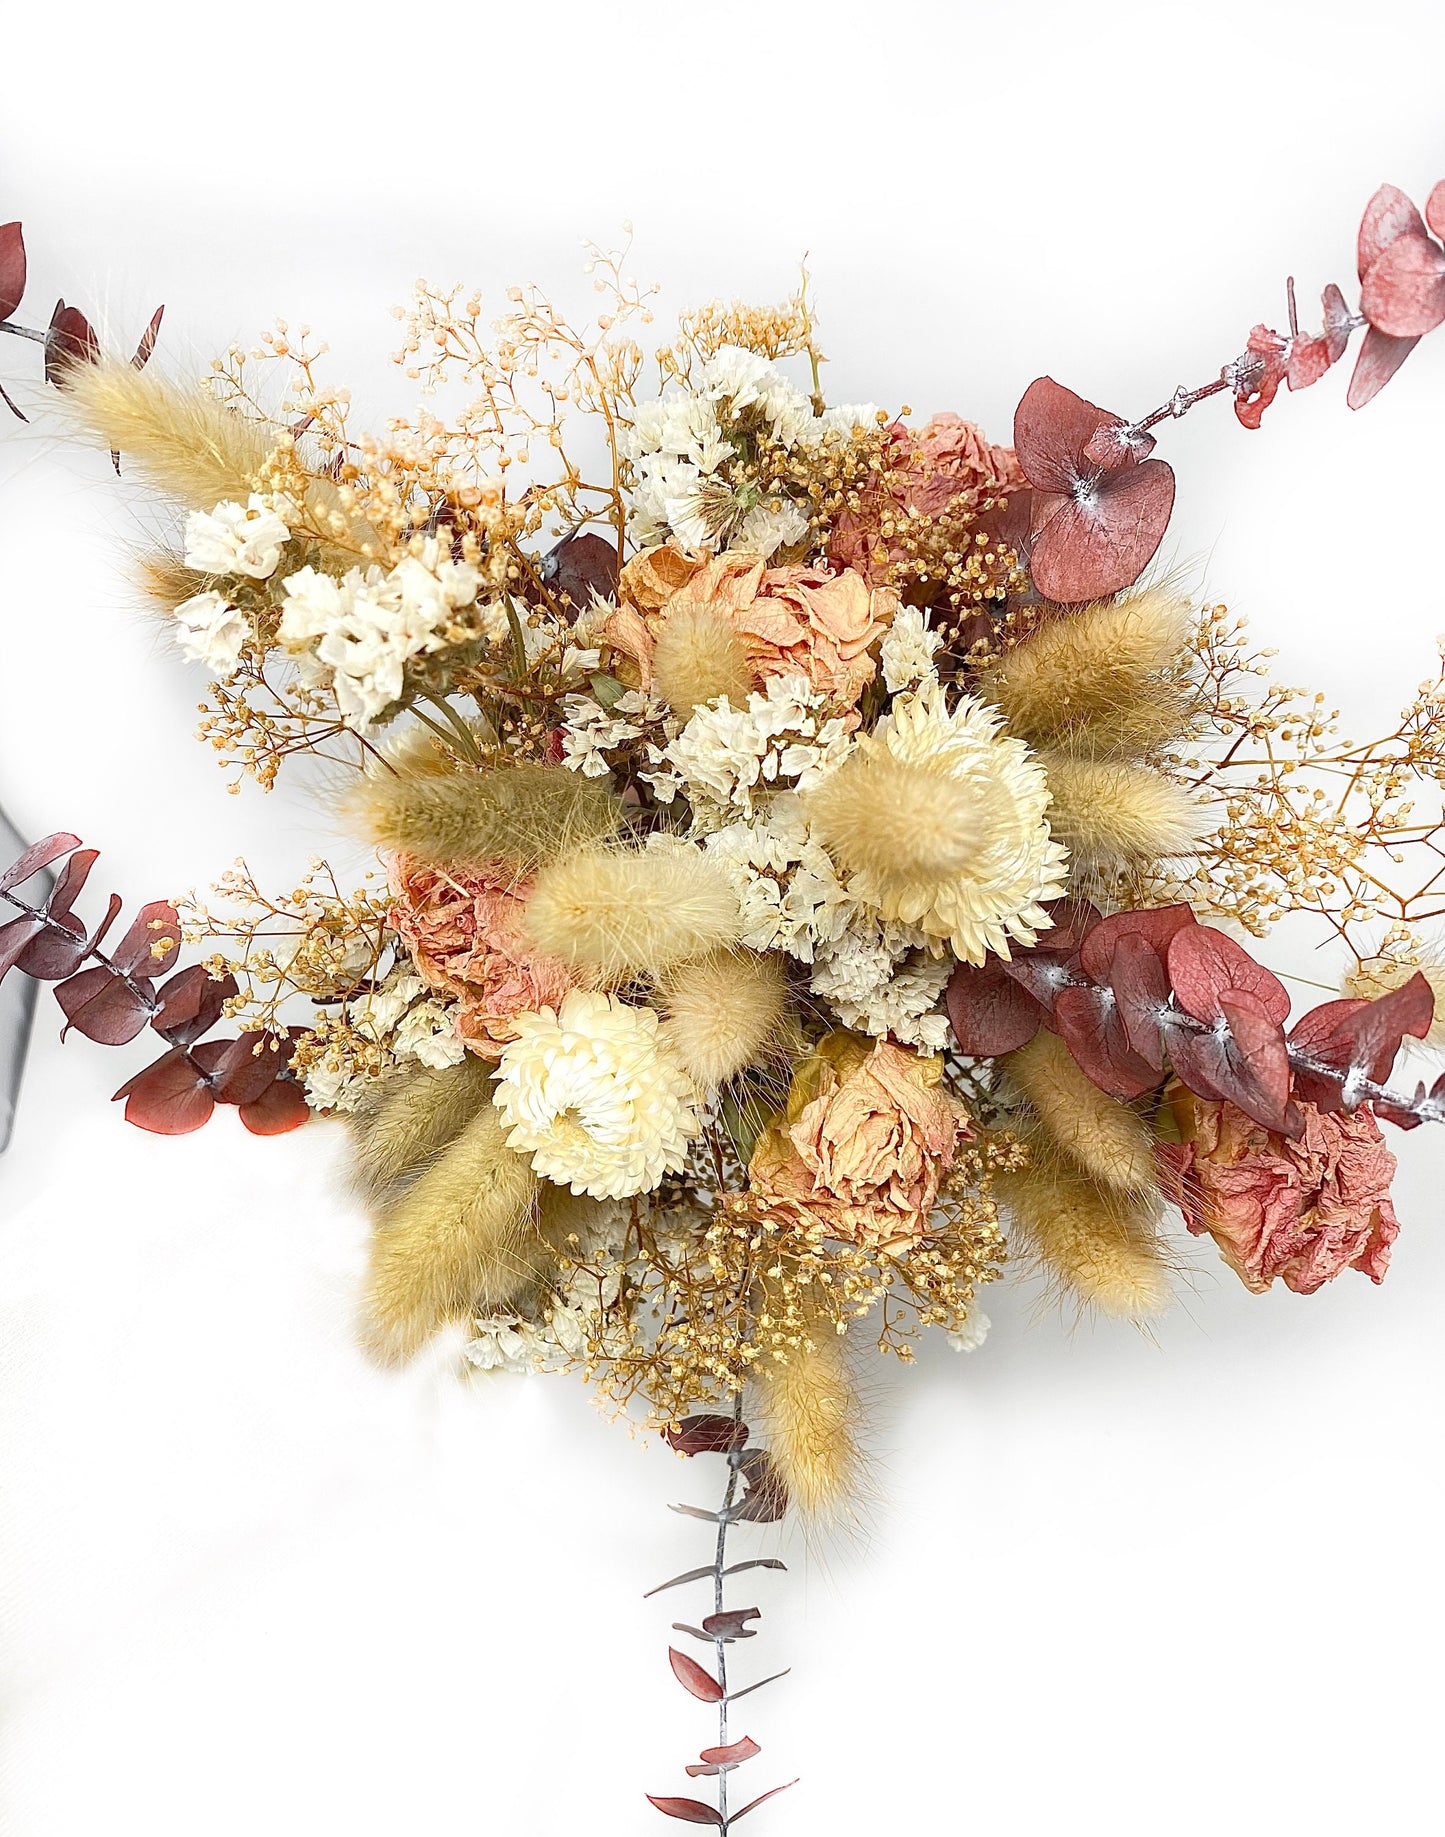 Fall Bouquet, Wedding, Dried Flowers, Majestic, Preserved Floral, Bridal, Ribbon, Neutral Colors, Peonies, Gift Bouquet, Bunny Tails